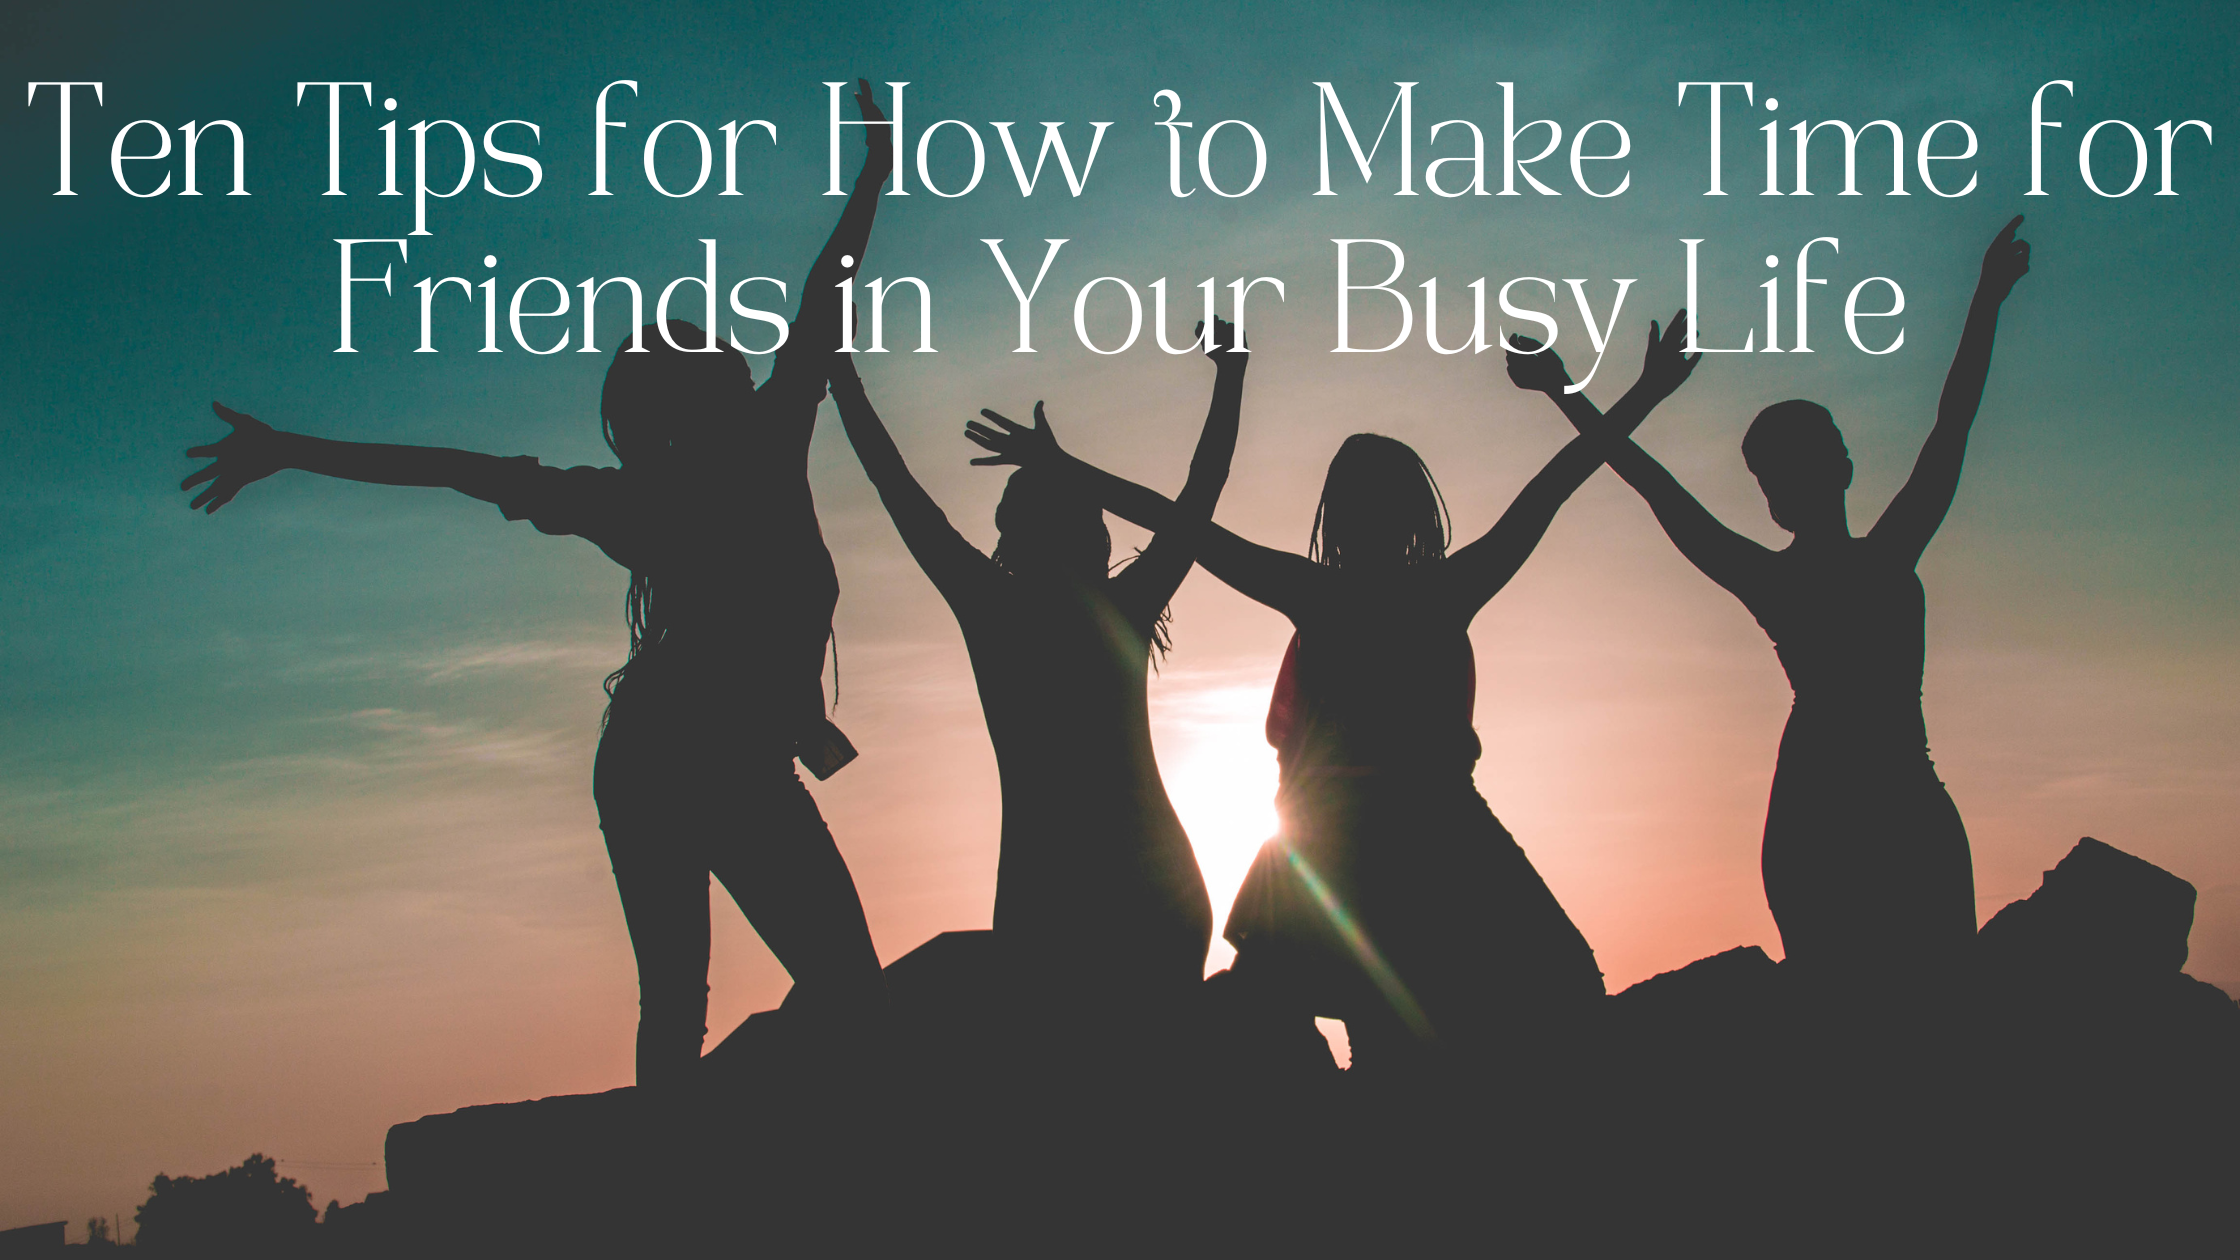 Ten Tips for How to Make Time for Friends in Your Busy Life